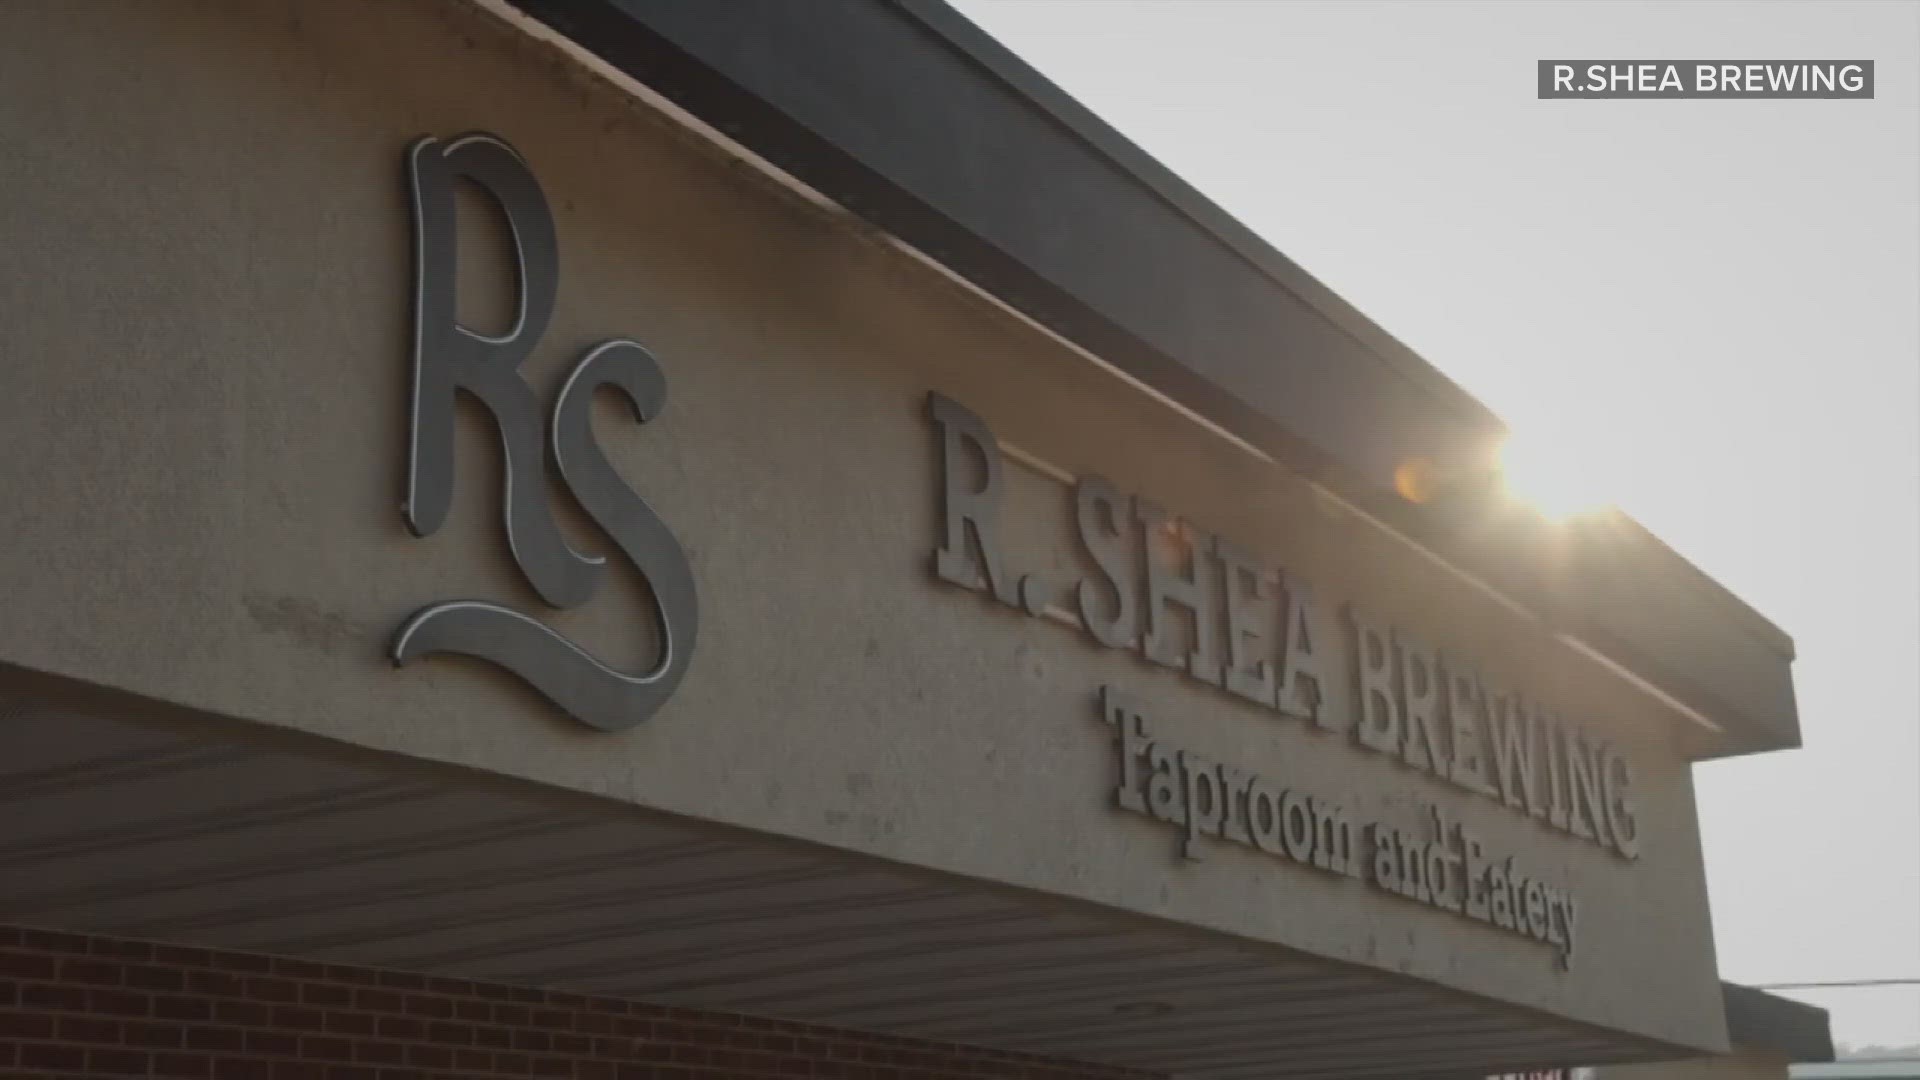 R. Shea Brewing Company announced on Facebook that they will be closing both locations on March 3.